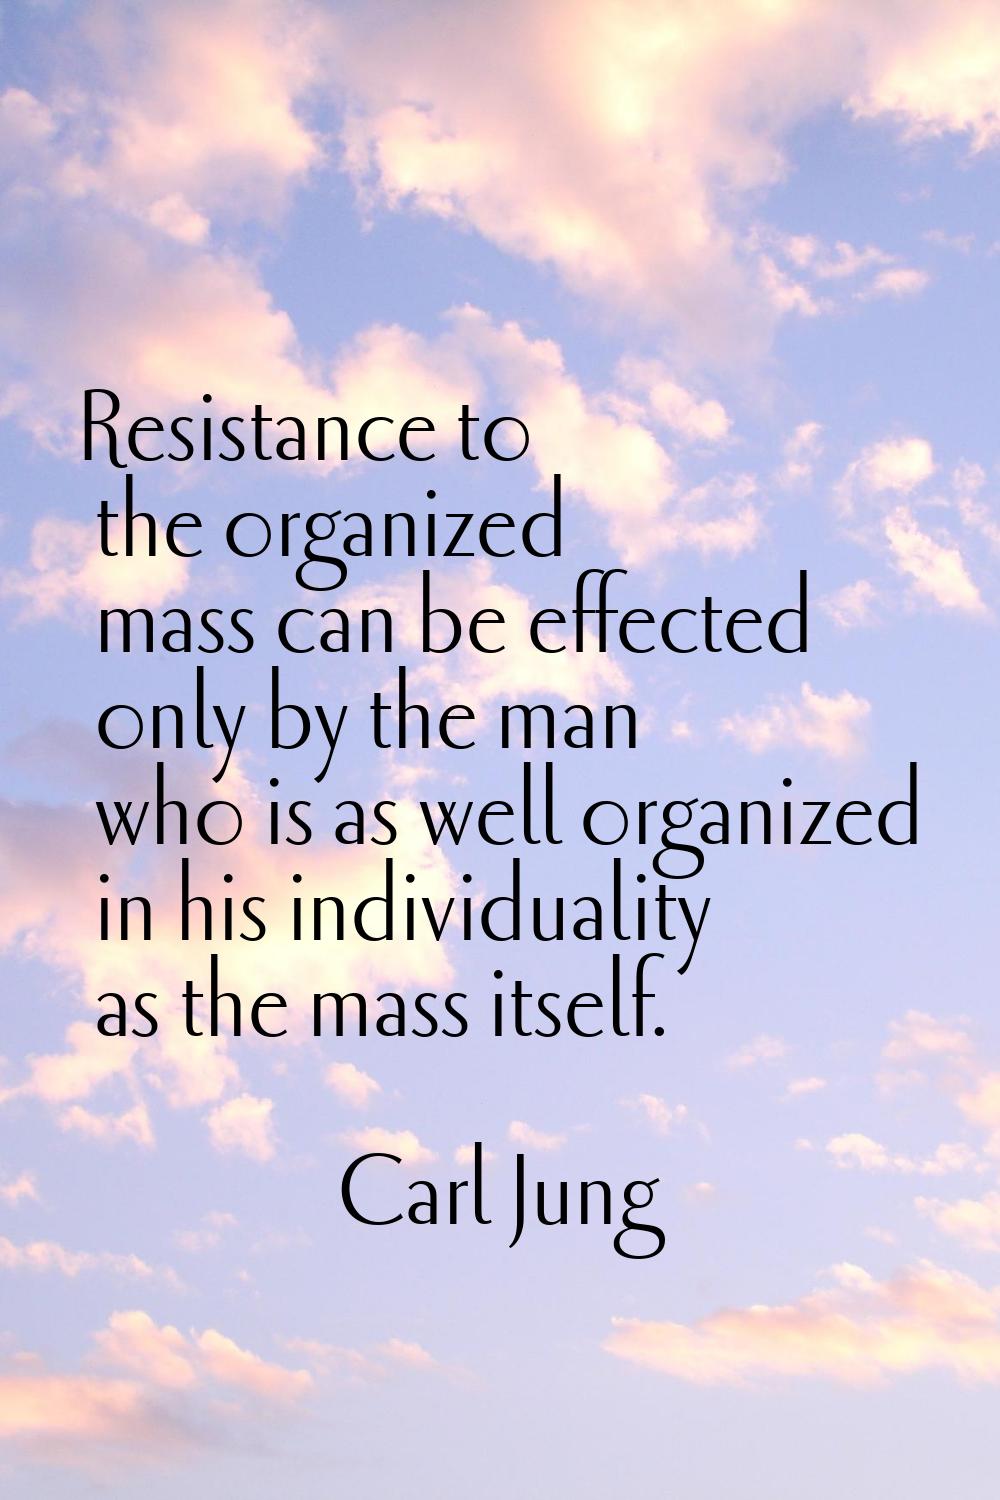 Resistance to the organized mass can be effected only by the man who is as well organized in his in